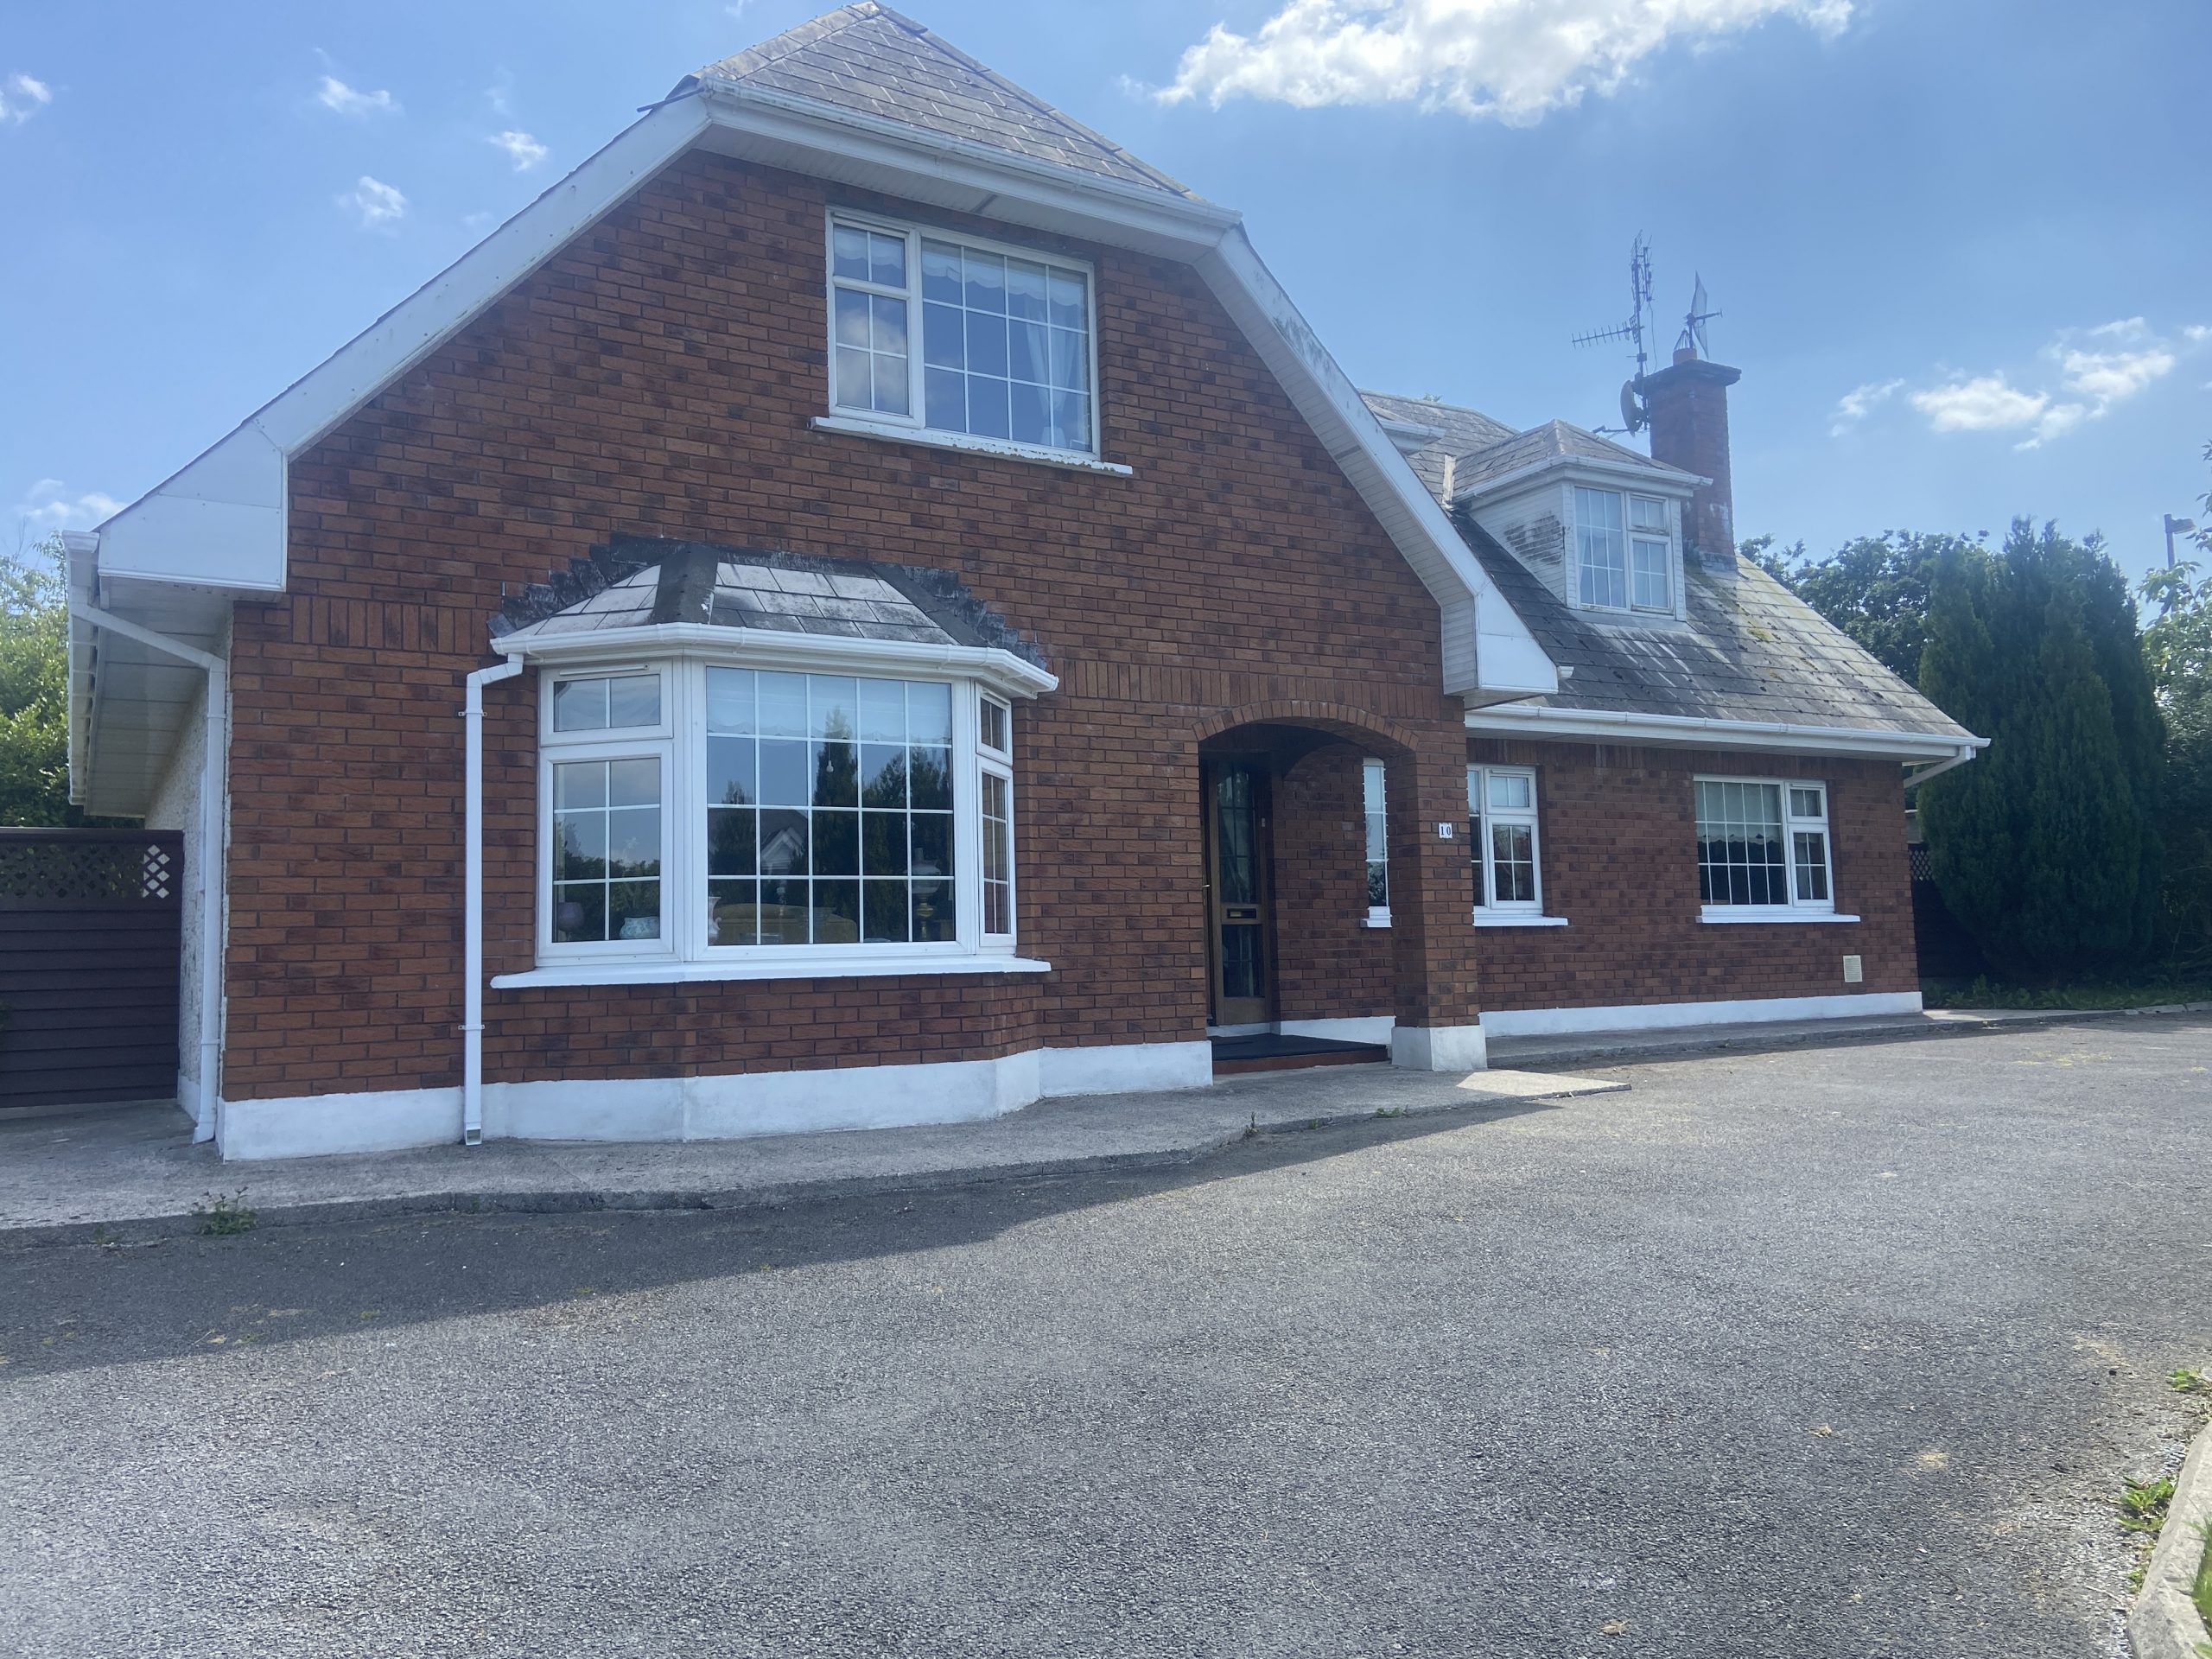 Detached Family Home | 10 Woodland Park, Barry’s Boreen, Fermoy P61 VF10